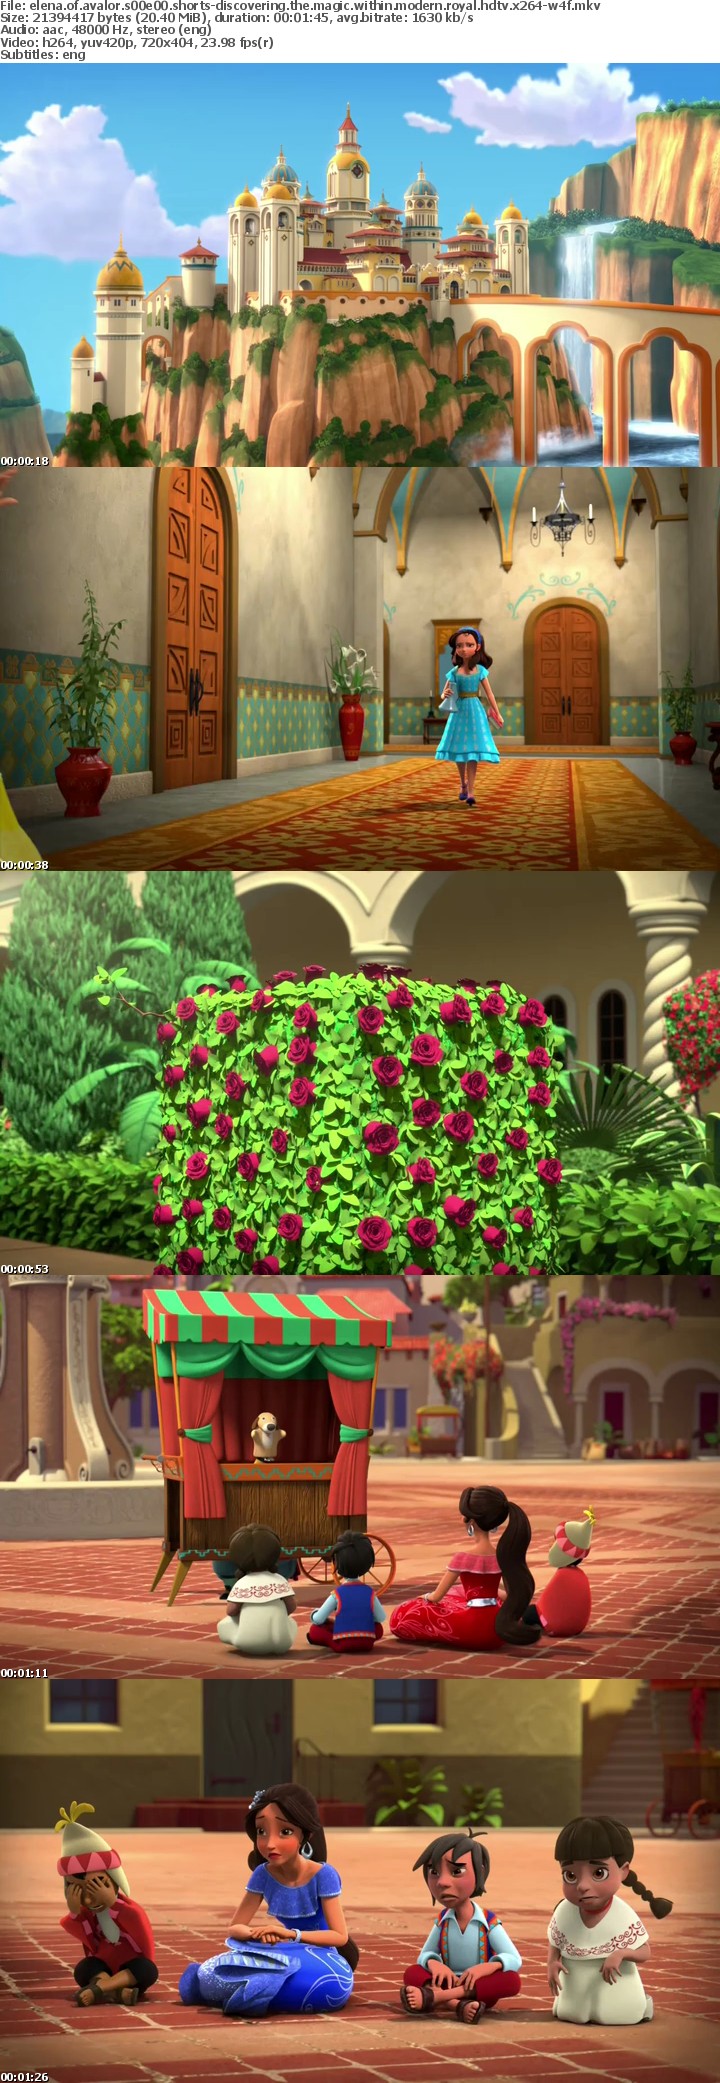 Elena of avalor discovering the magic within